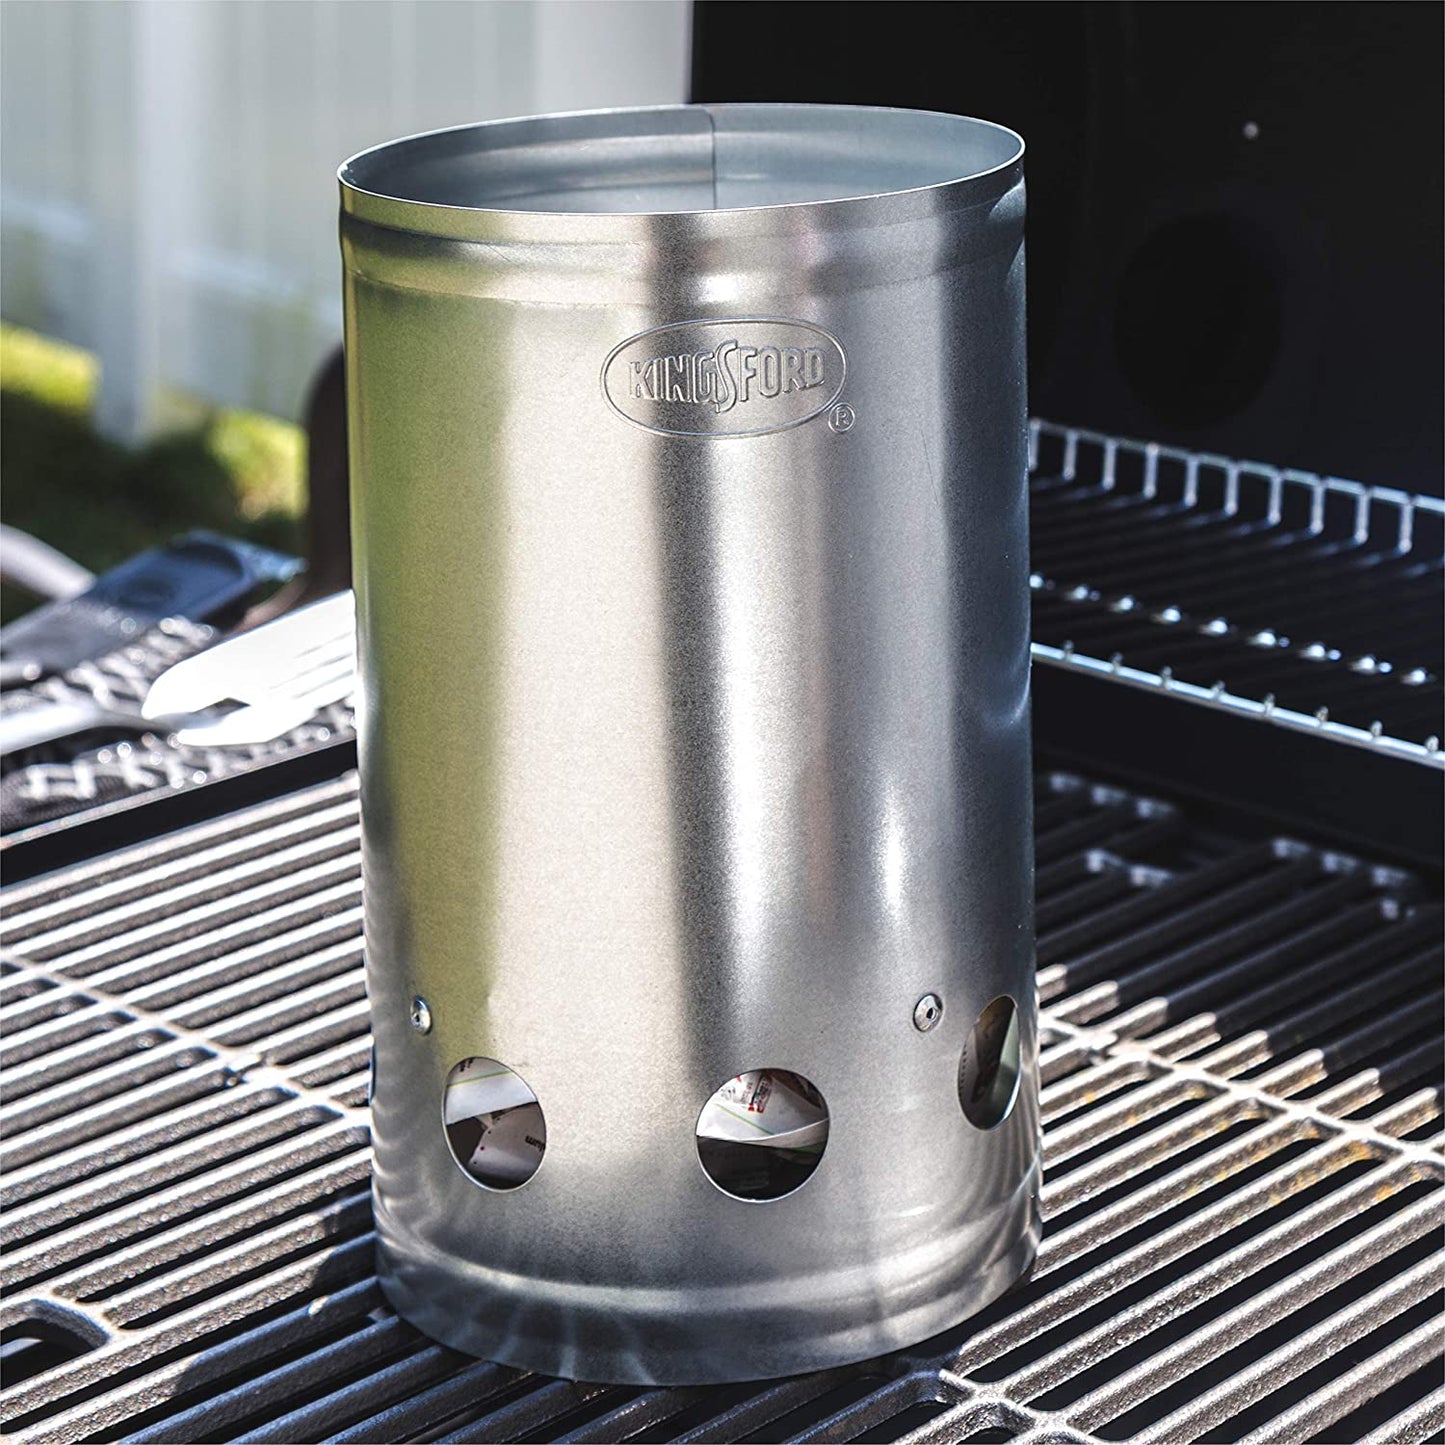 KINGSFORD Heavy Duty Deluxe Charcoal Chimney Starter | BBQ Chimney Starter for Charcoal Grill and Barbecues, Compact Easy to Use Chimney Starters and BBQ Grill Tools